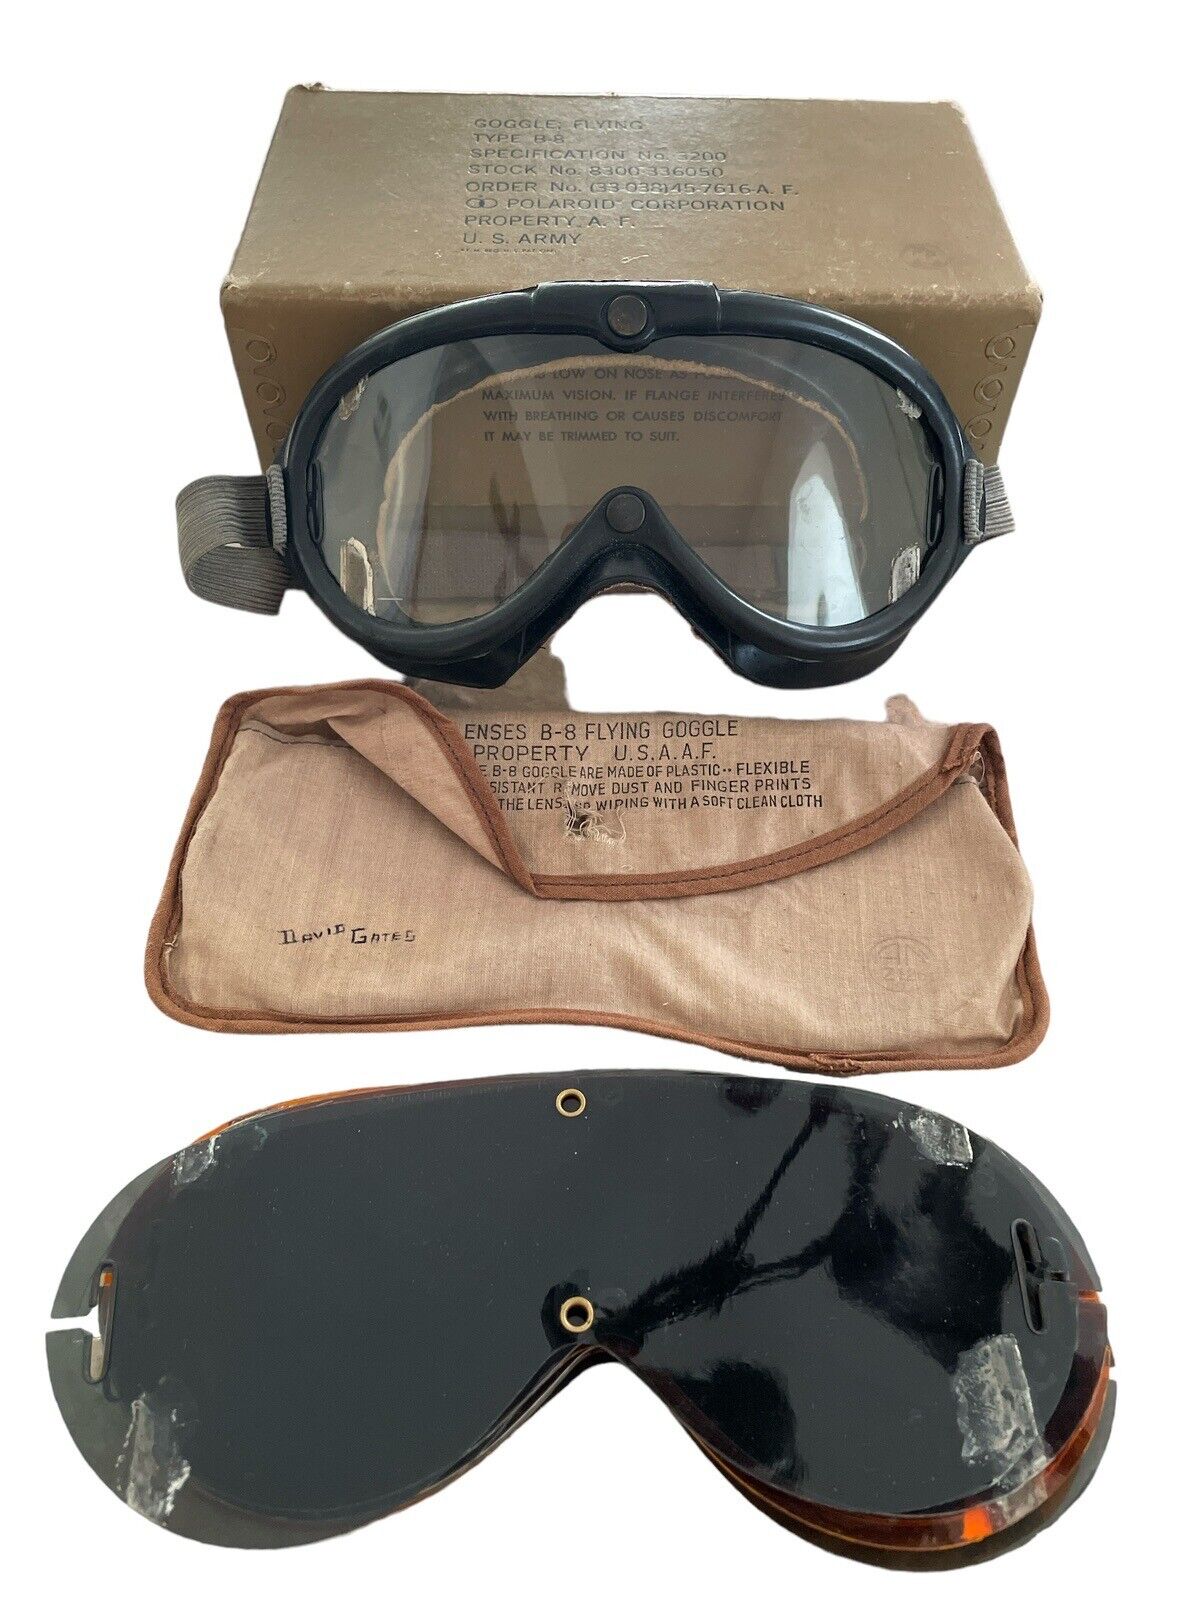 WWII 1944 US ARMY Officer B-8 Flight Flying Goggles Box Lenses Complete Polaroid